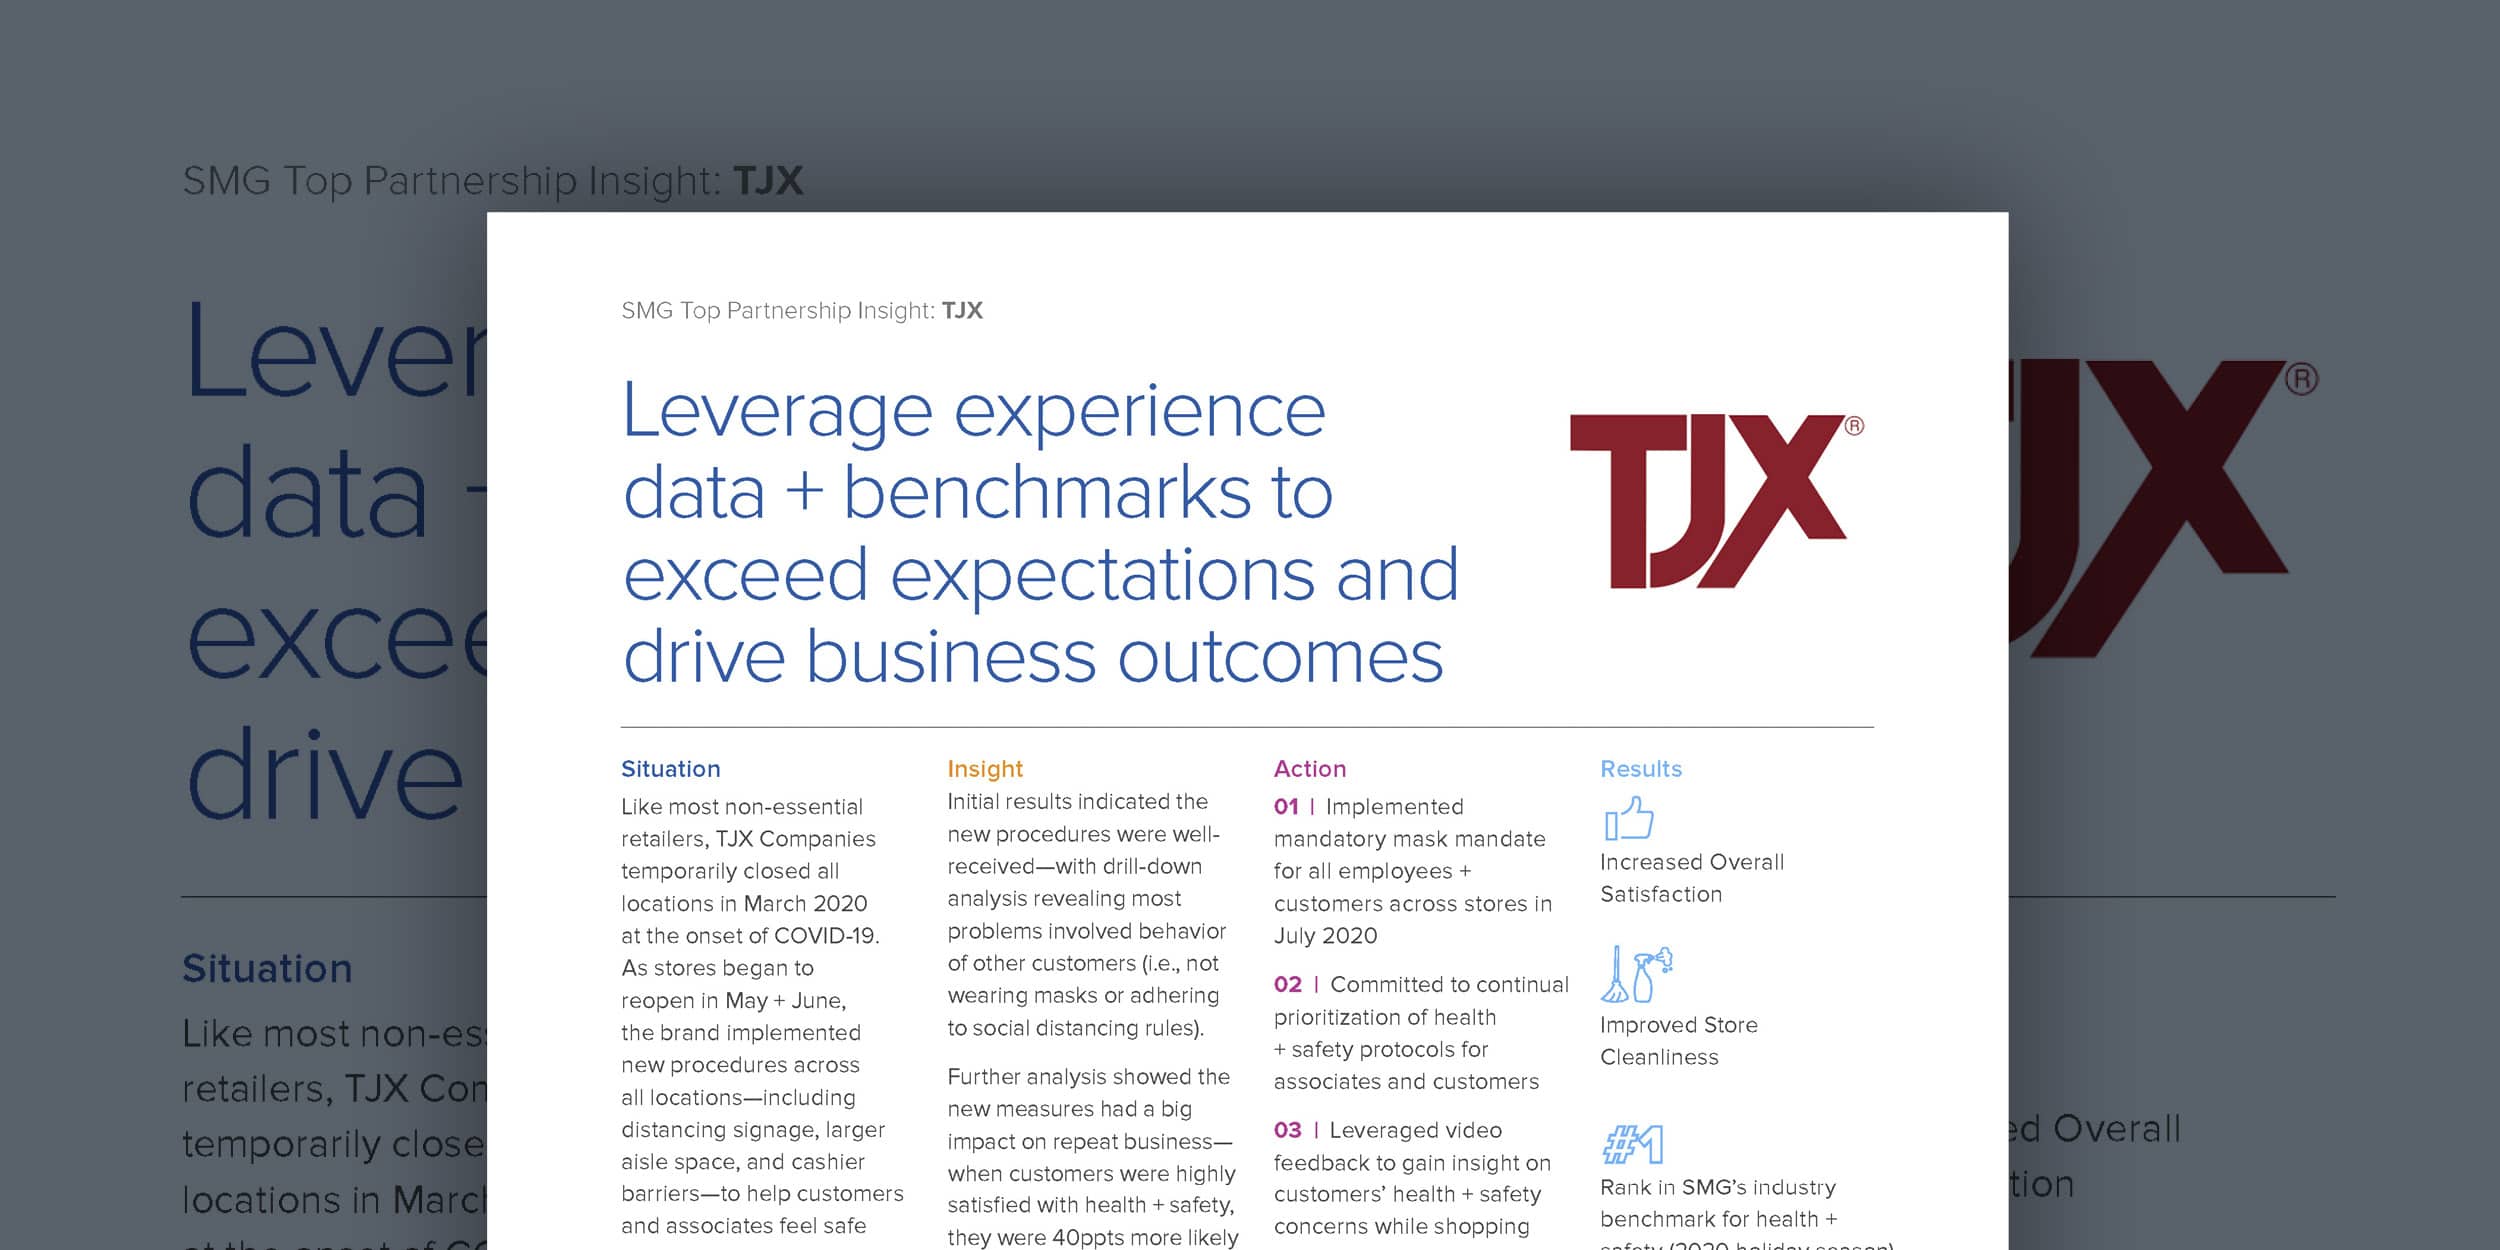 Leverage experience data + benchmarks to exceed expectations and drive business outcomes